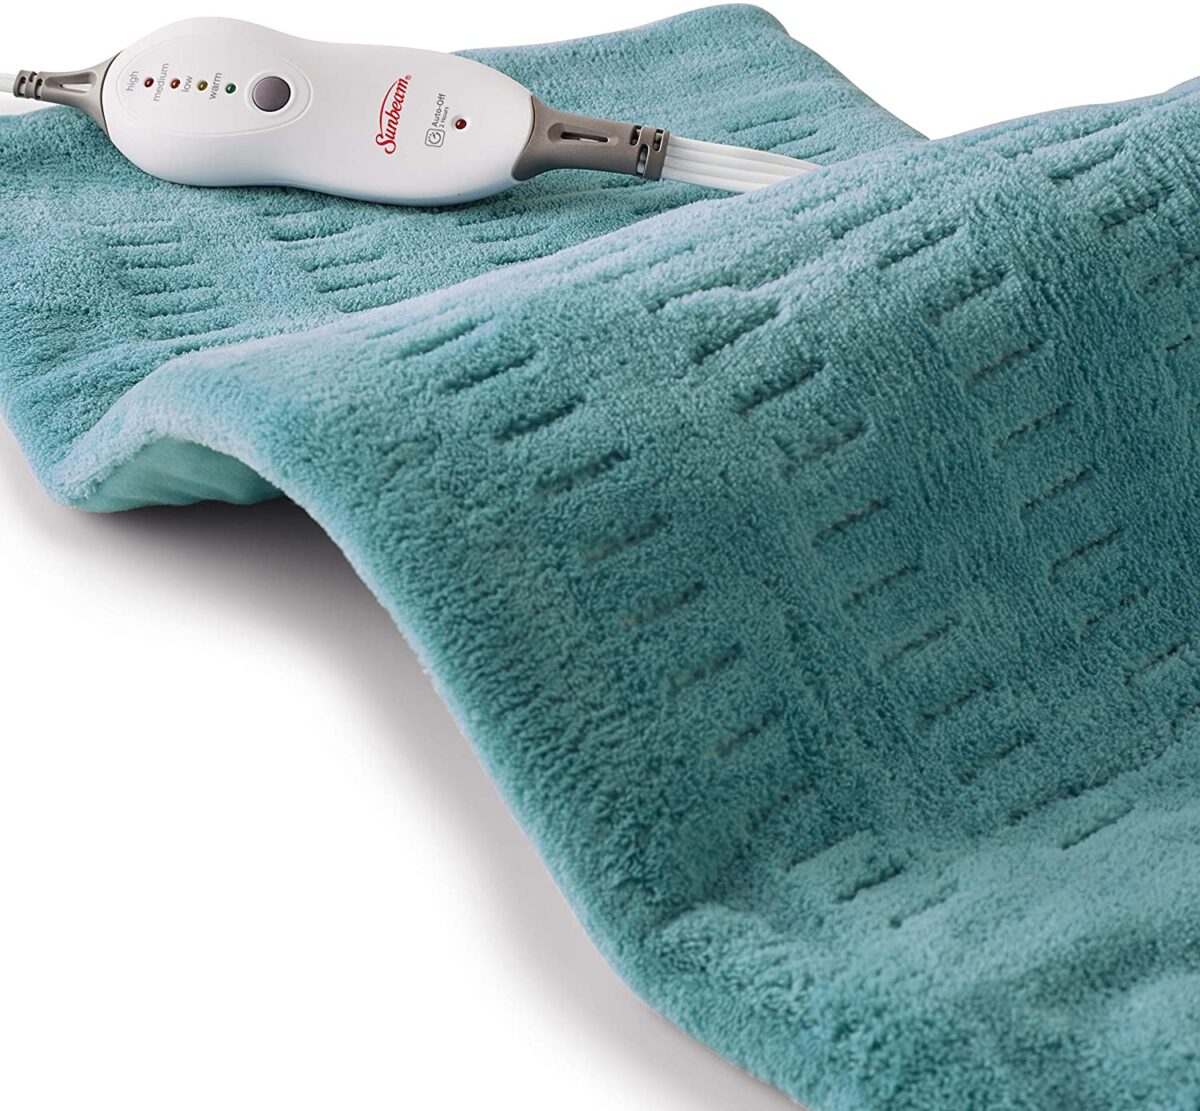 Sunbeam Heating Pad for Pain Relief, XL King Size SoftTouch, 4 Heat Settings with Auto-Off, Teal, 12-Inch x 24-Inch